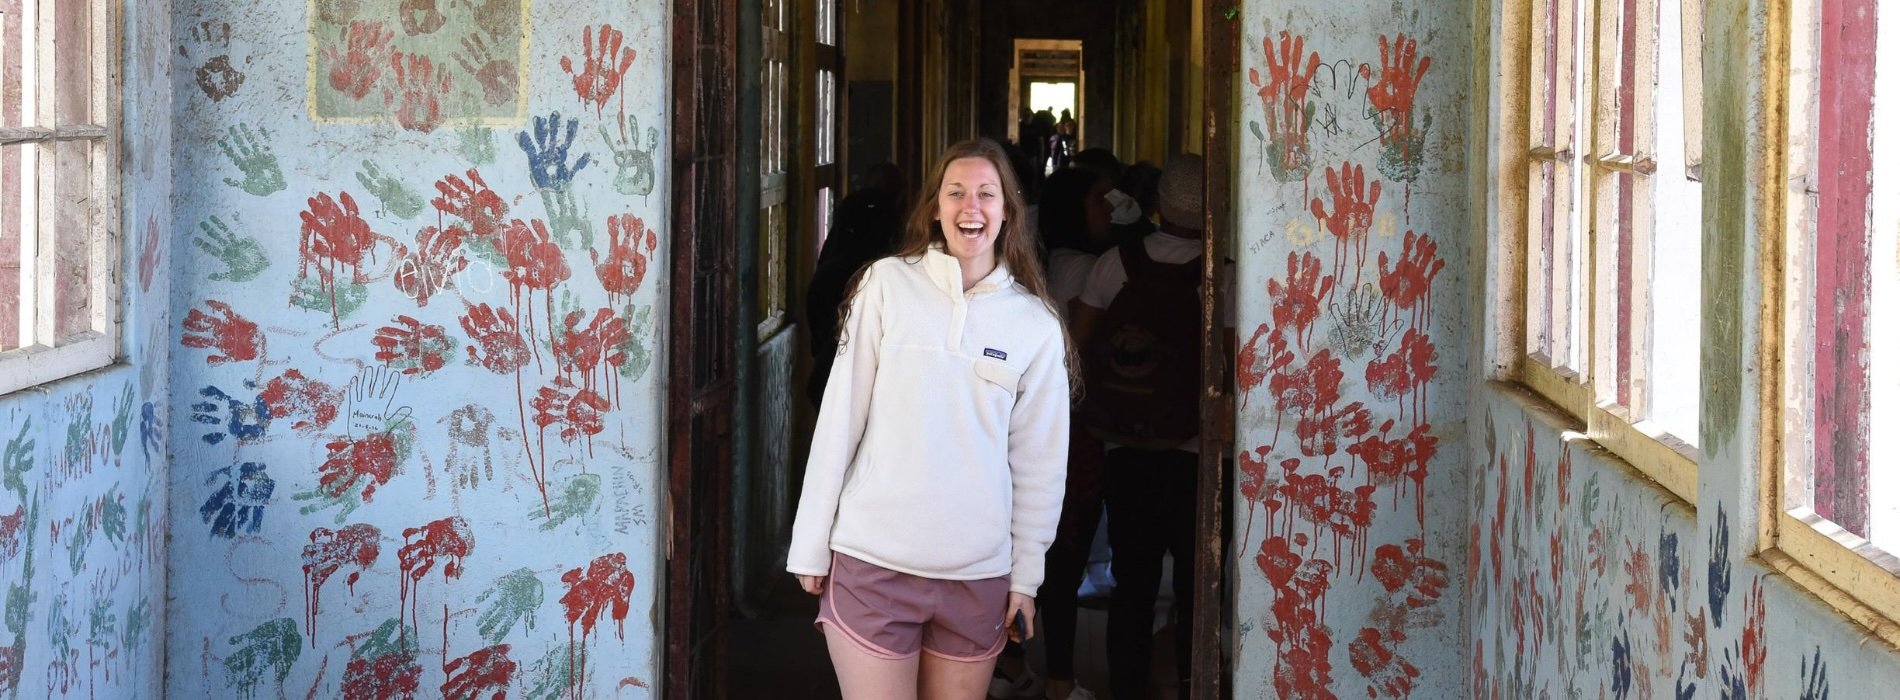 A student smiles brightly at the camera, standing in a building painted with handprints on a study abroad trip. 